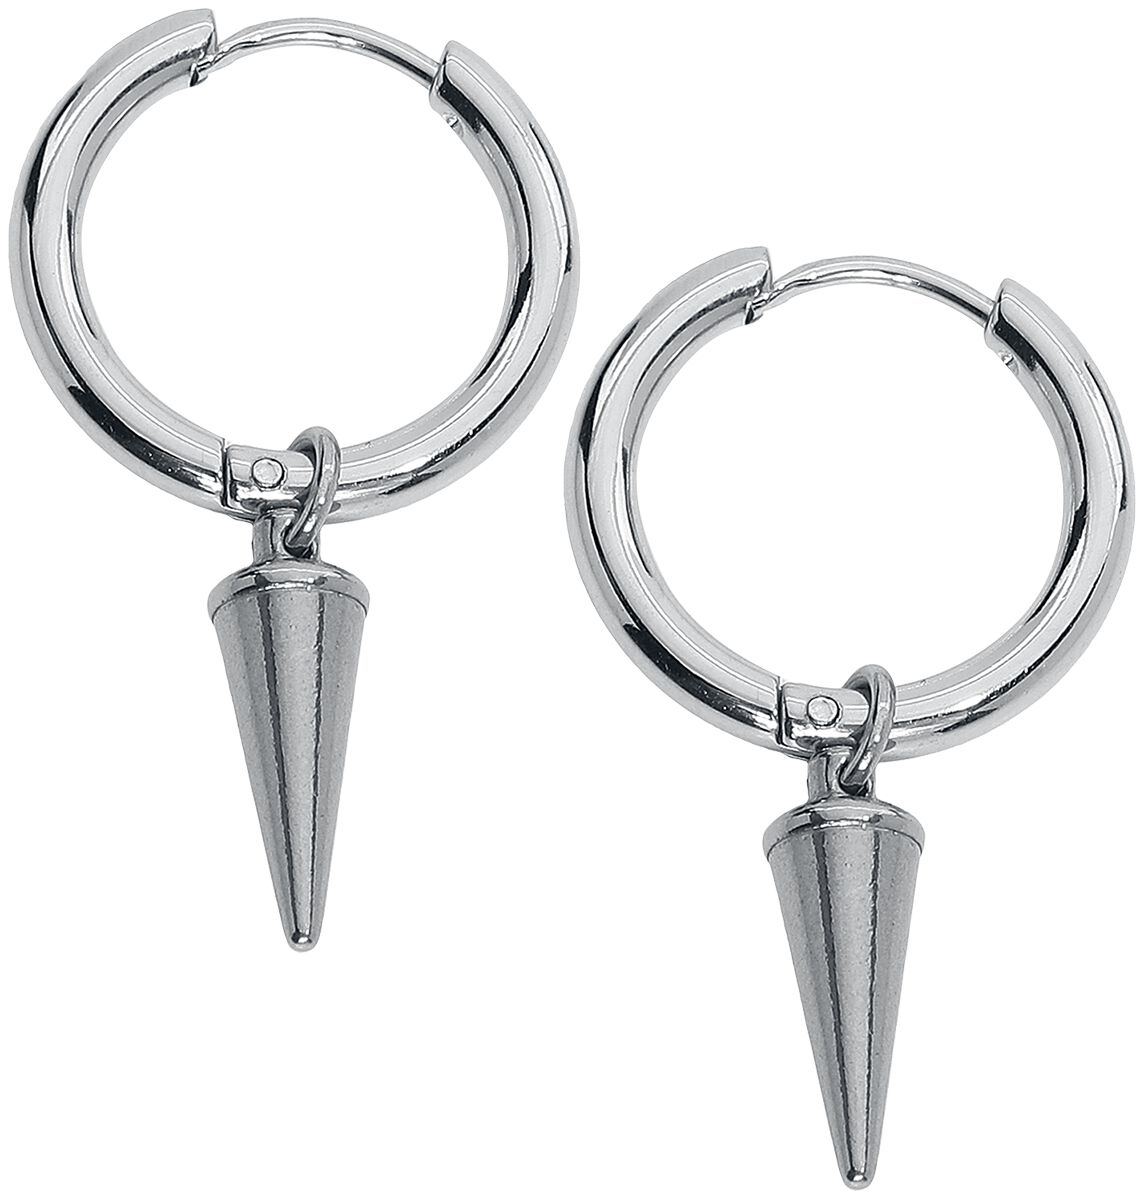 Image of Orecchino di etNox - Spike Hoop Earrings - Donna - colore argento